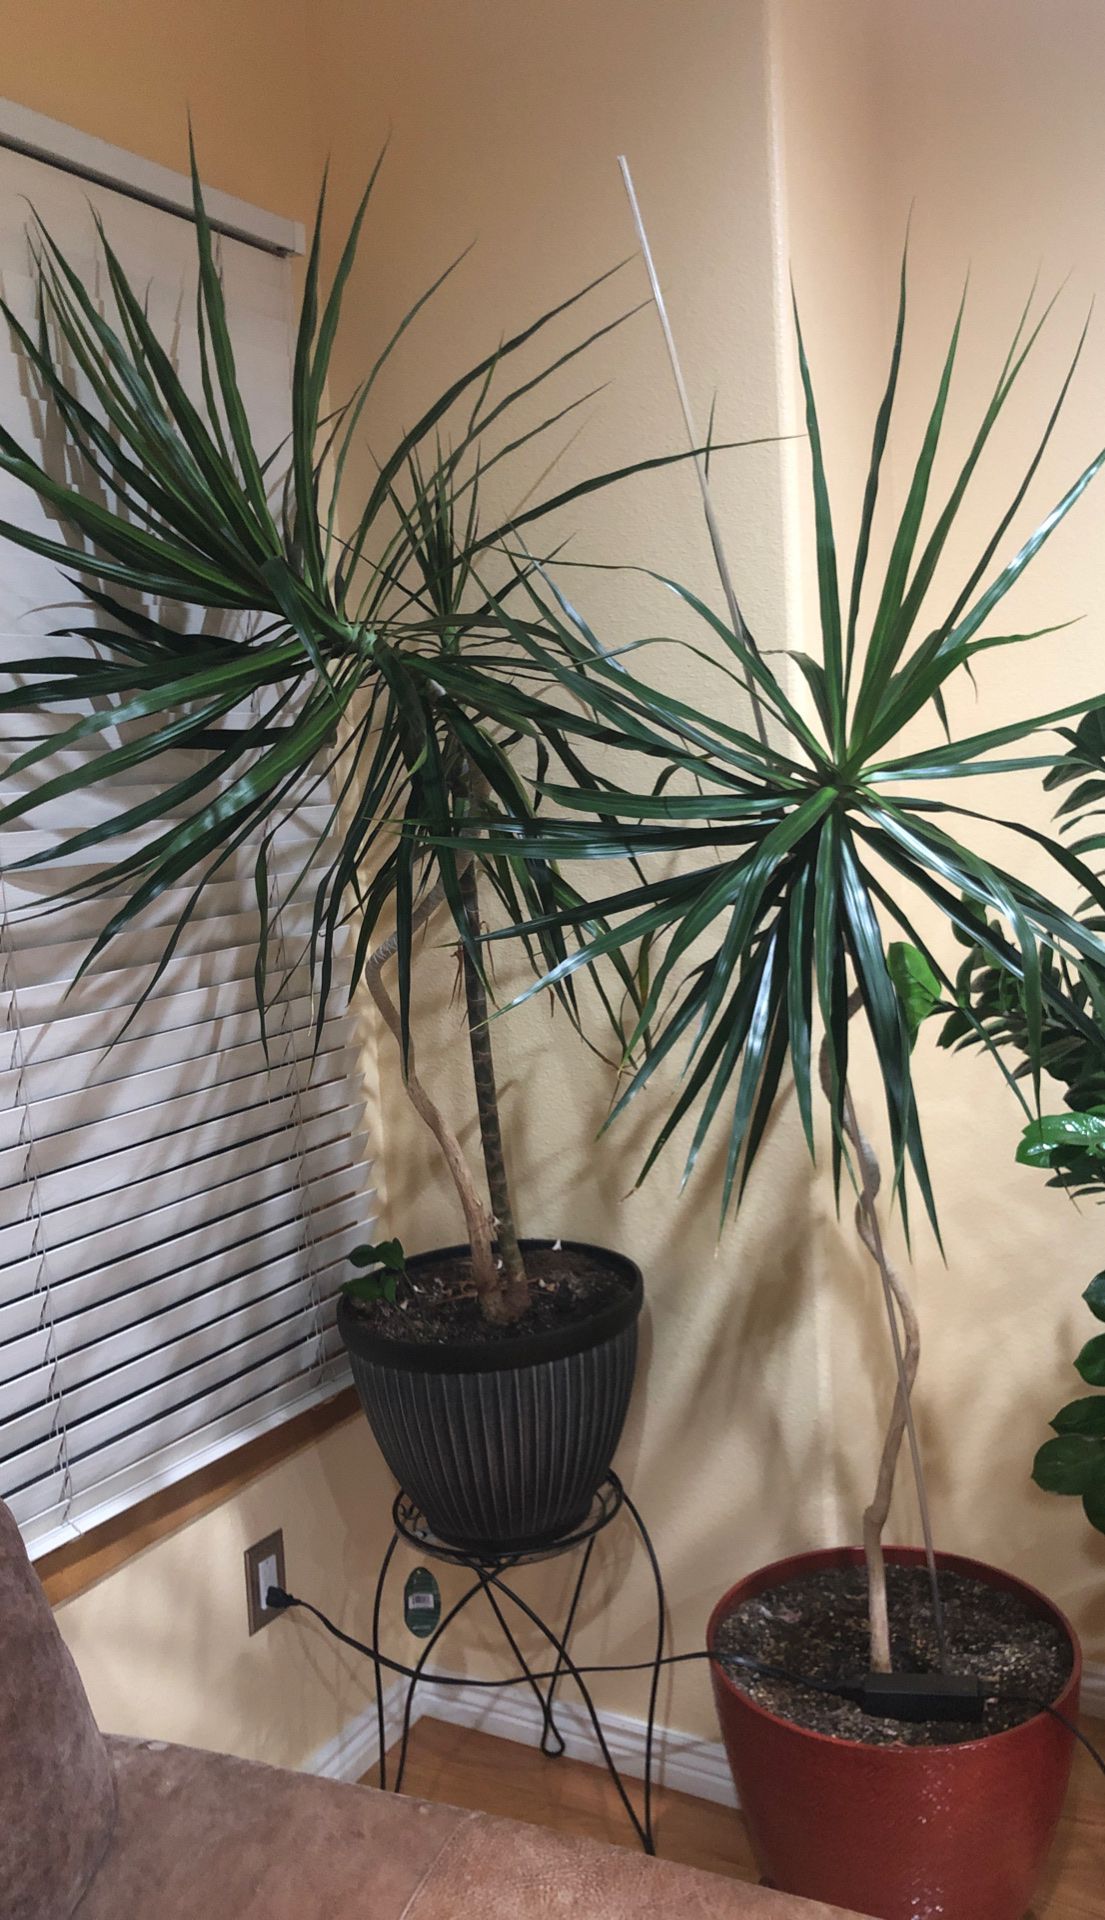 Big and tall dracaena house plants in the nice pots